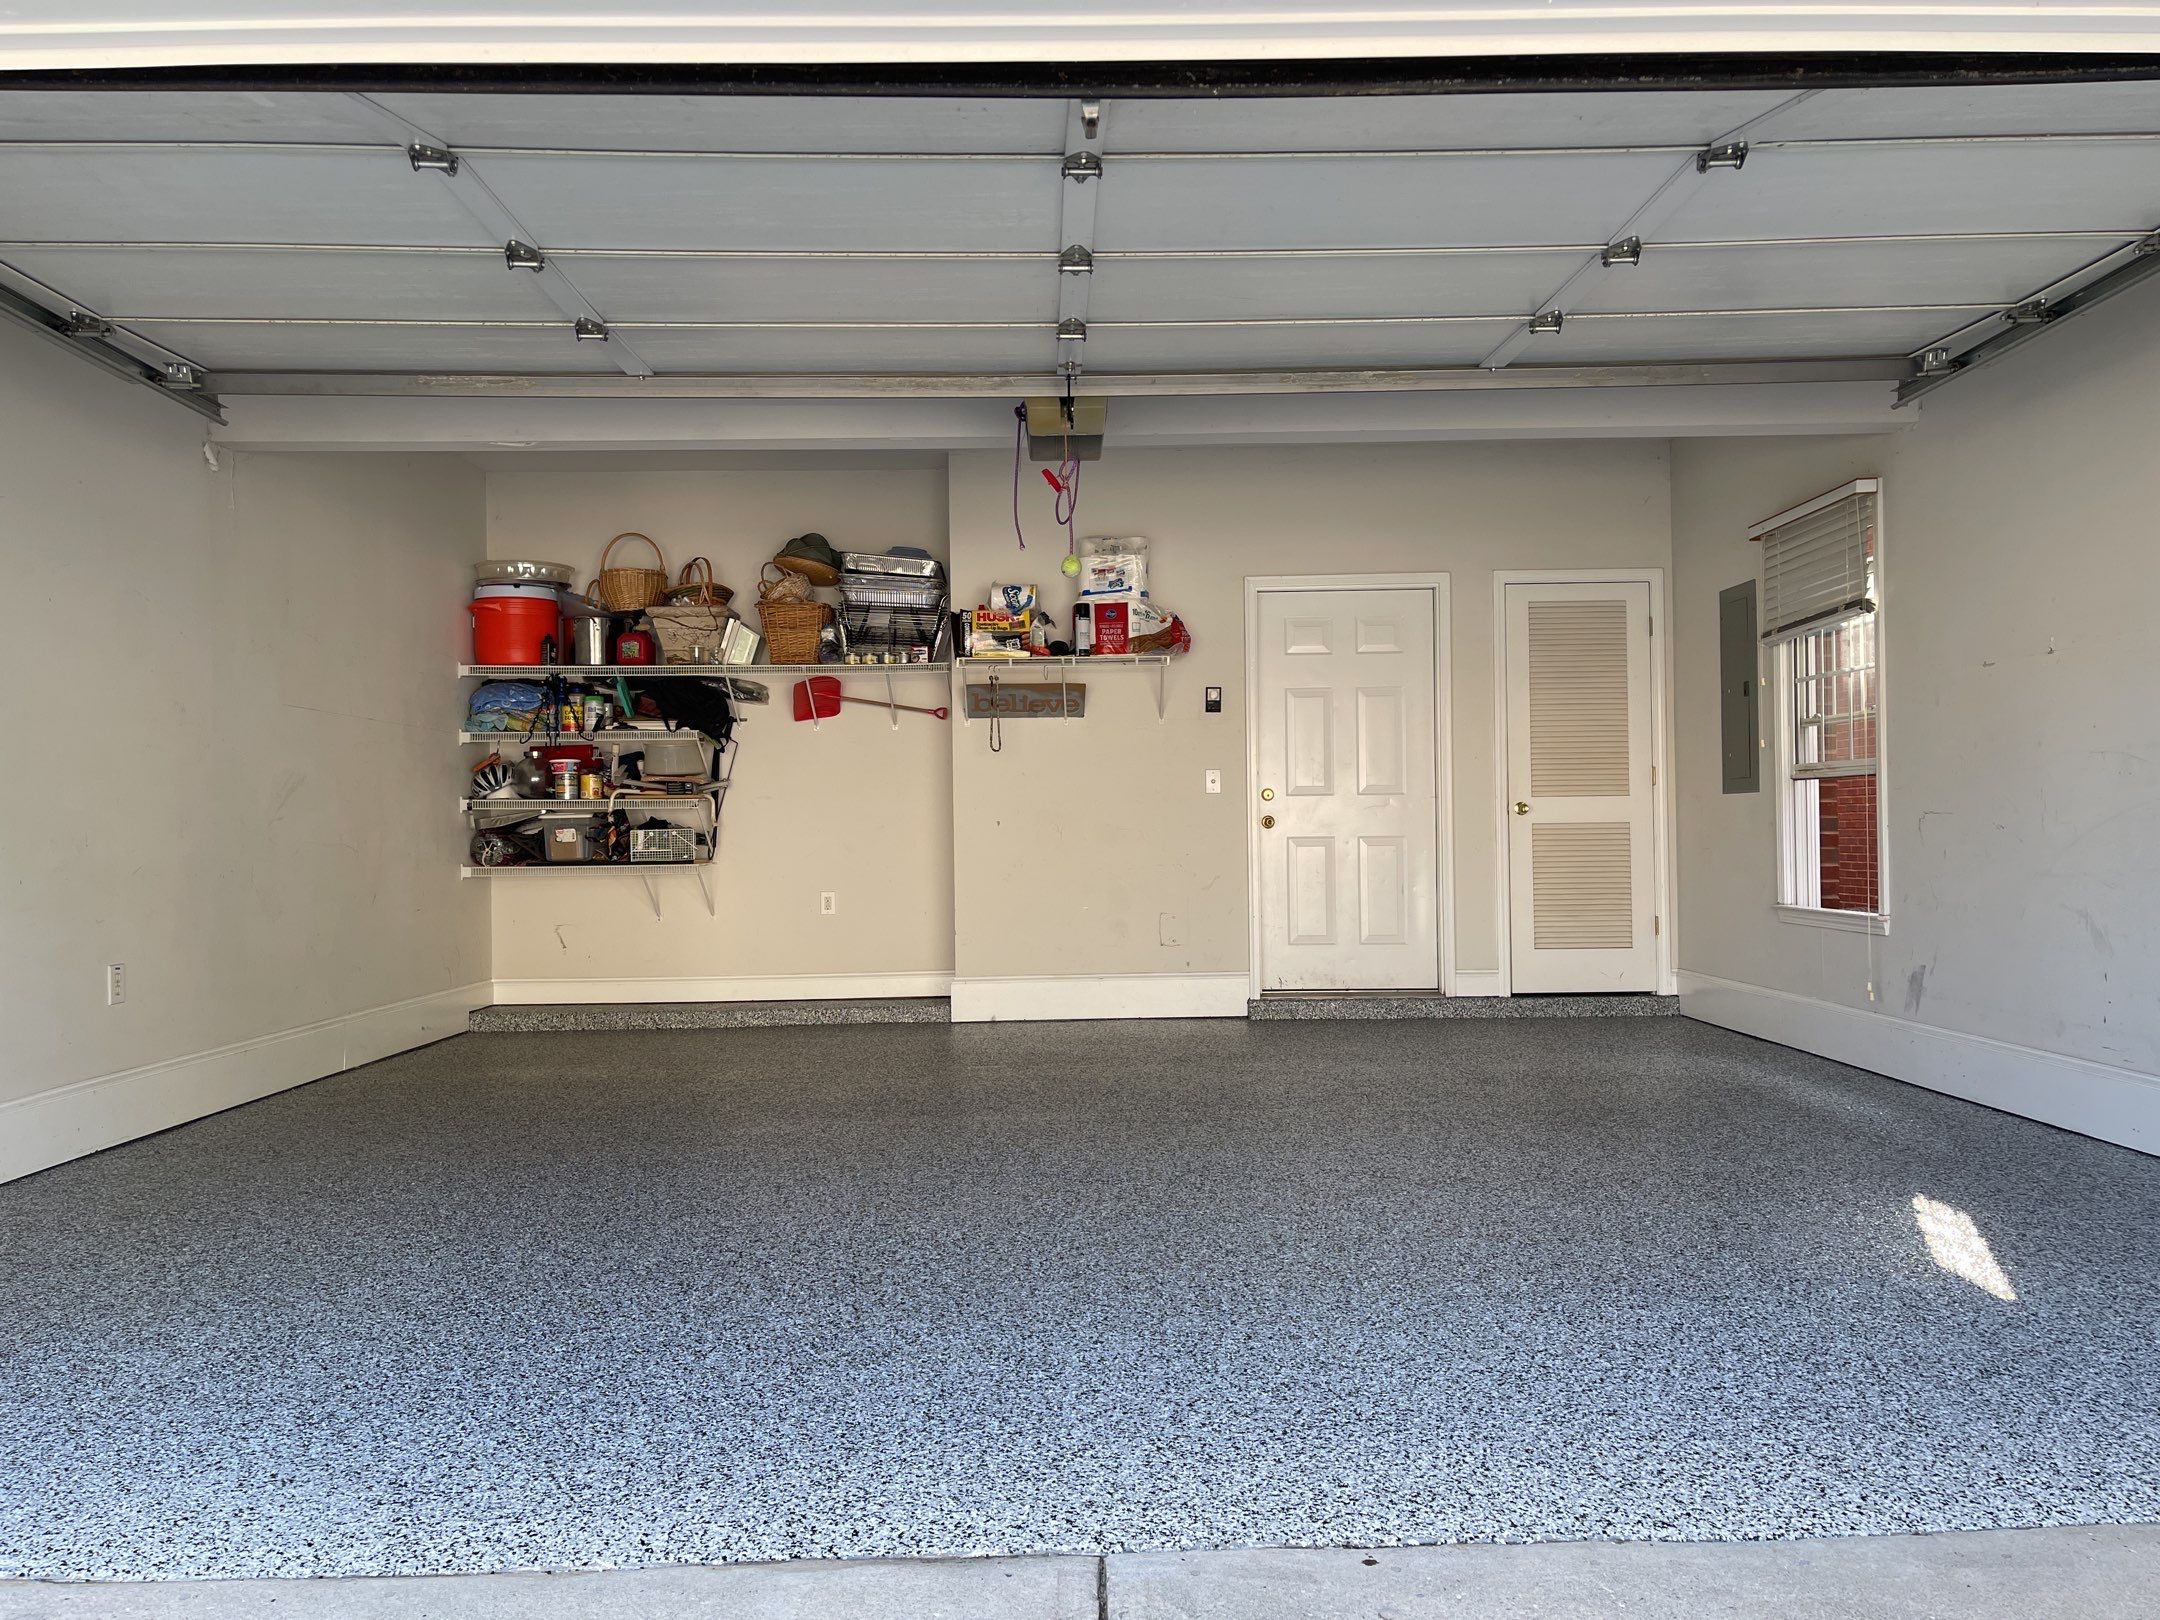 Transform Your Garage Floor with Concrete Coating – The Easiest DIY Project Yet!